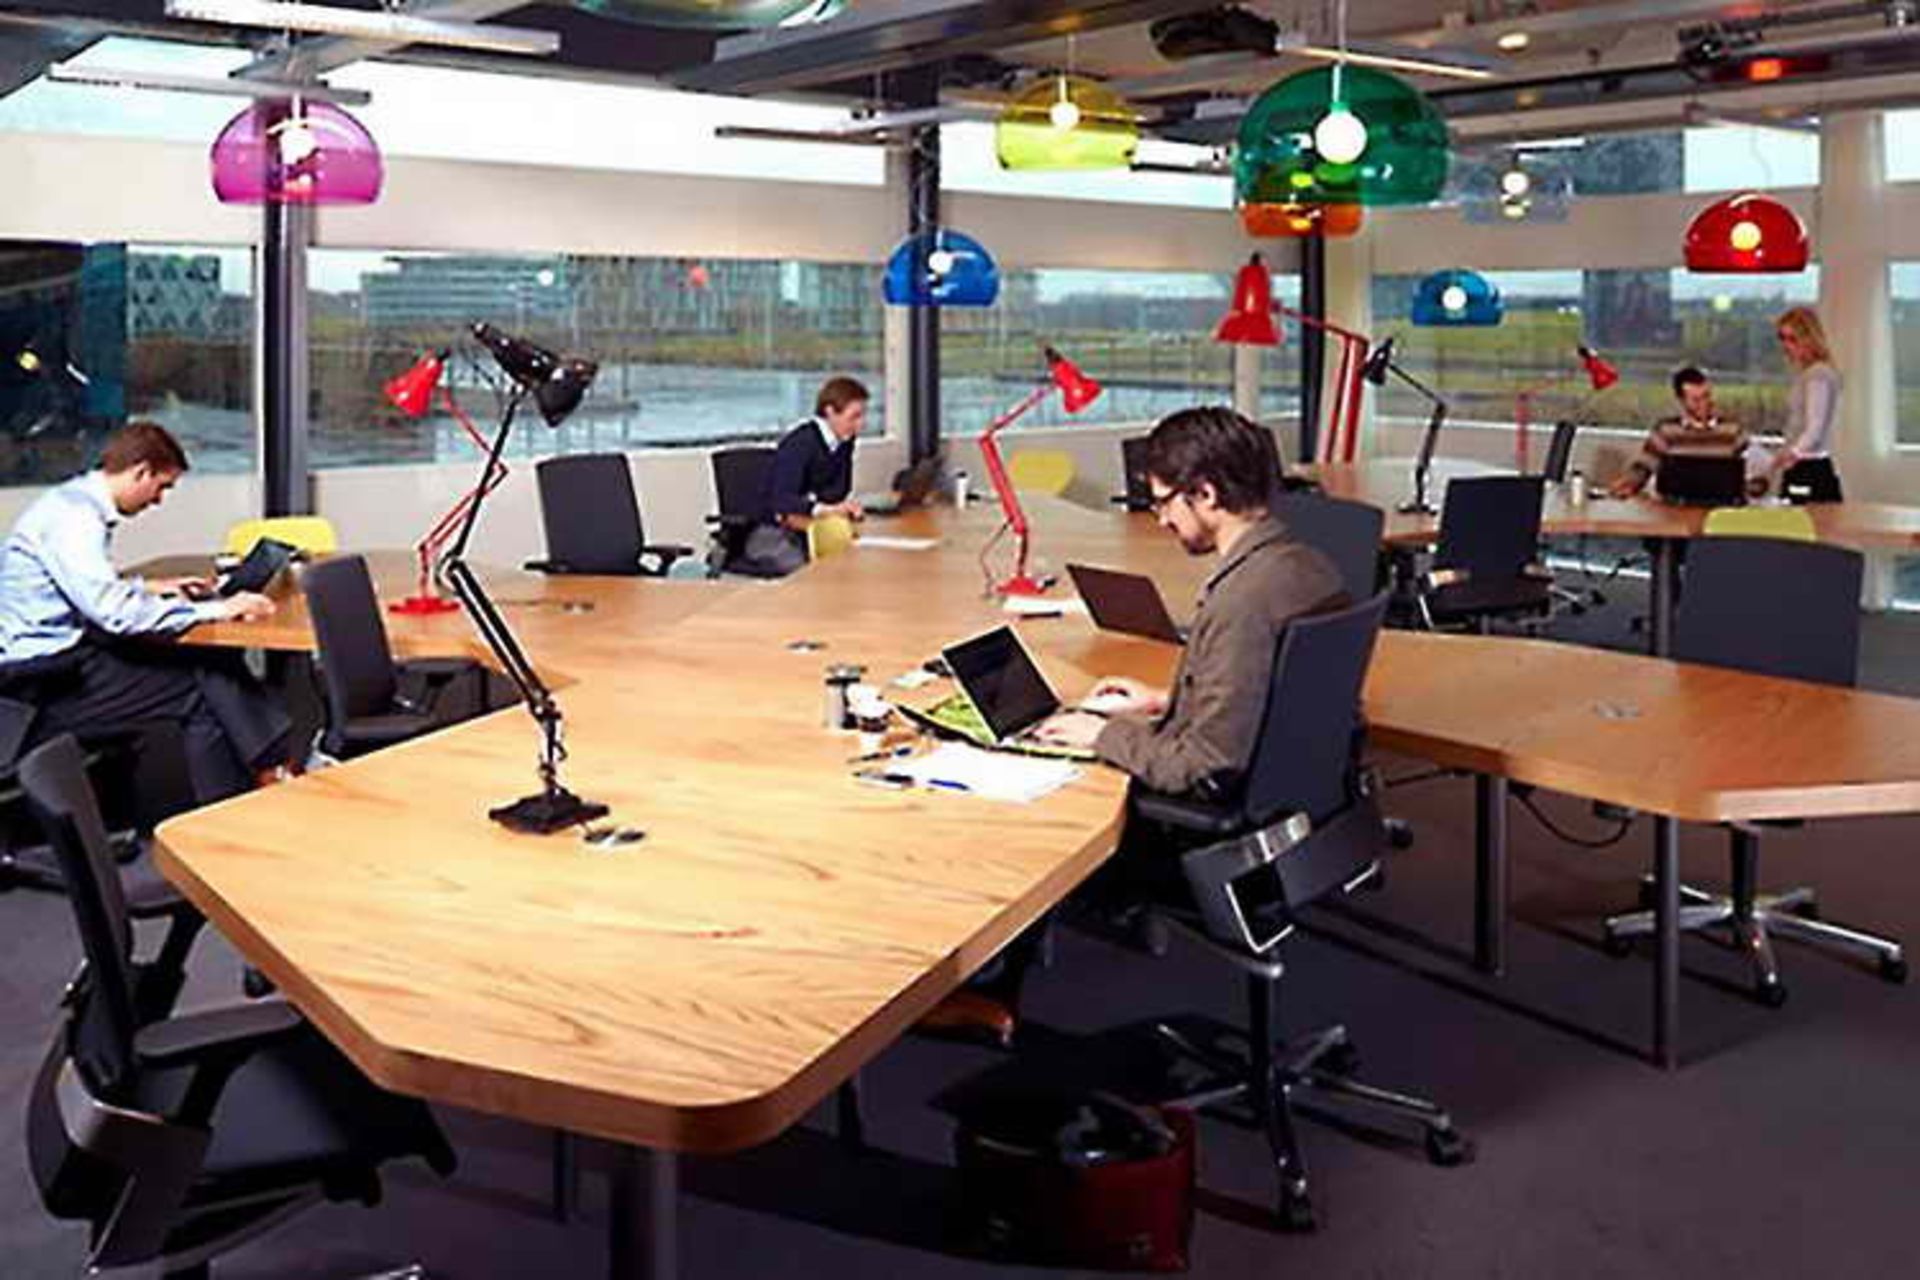 DO: keep movement and wellness in mind when outfitting your office